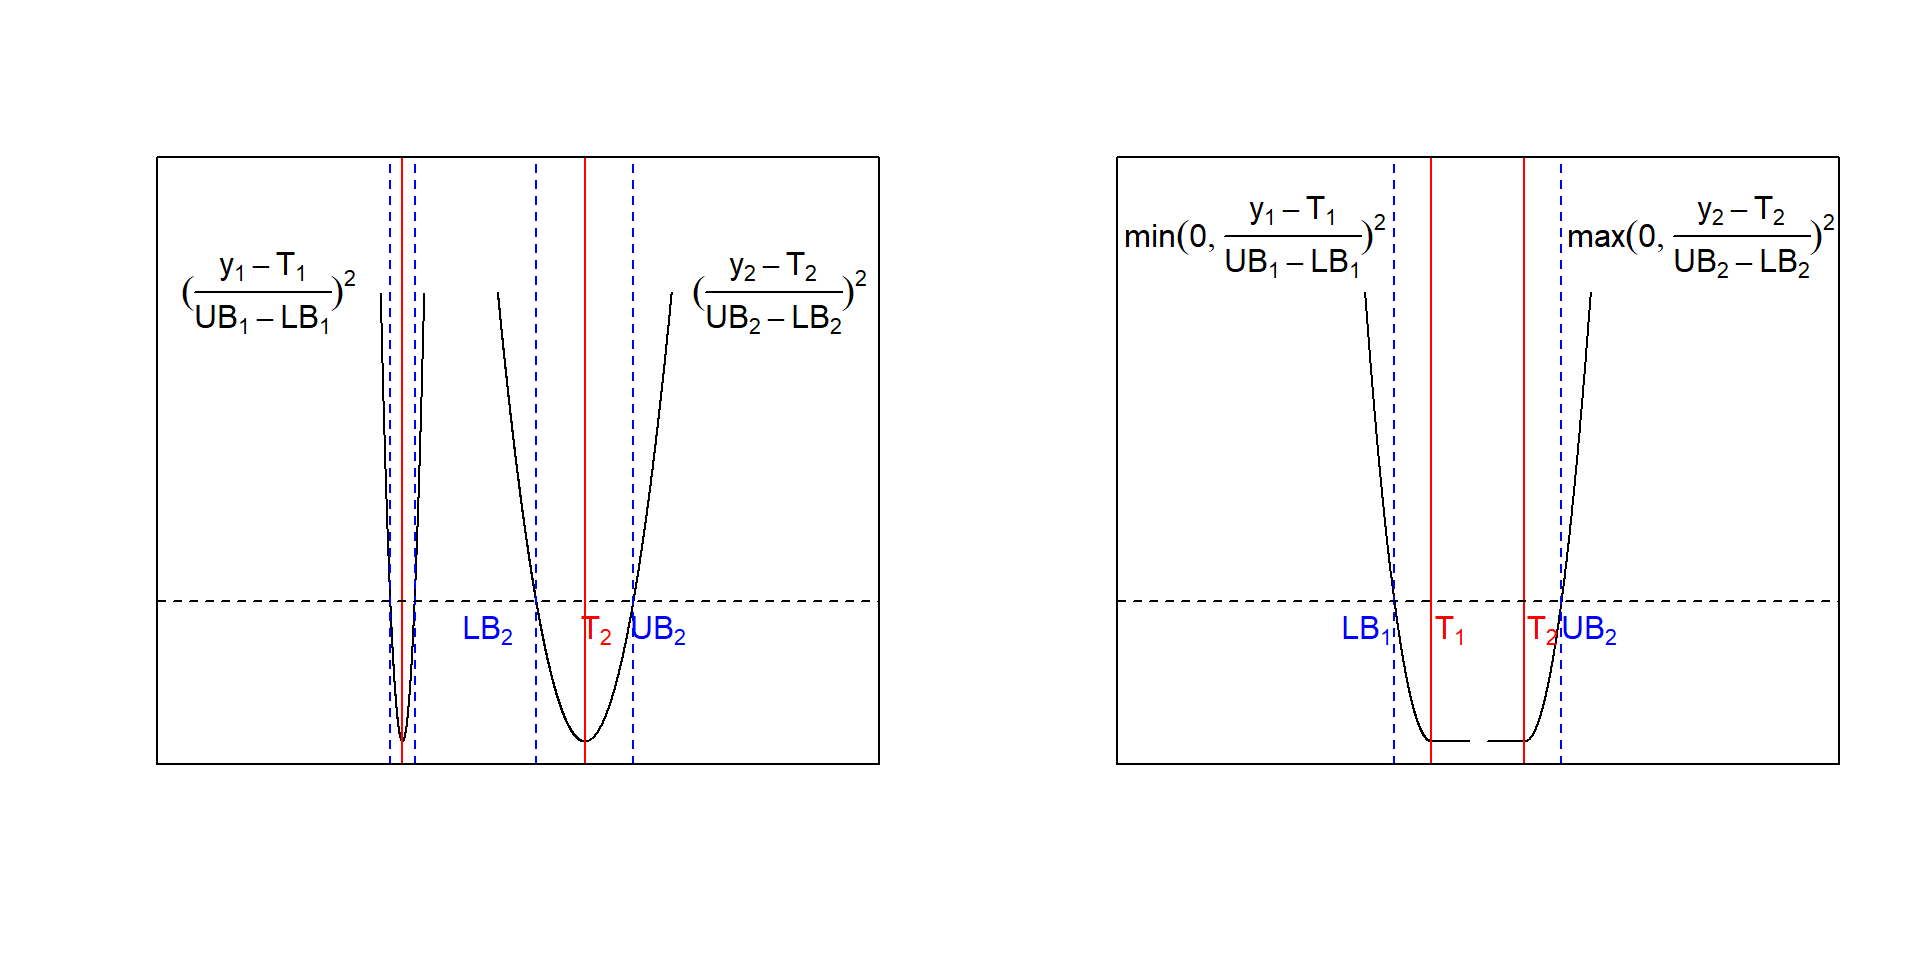 Convex penalty functions with narrow and wide acceptance range UB~i~-LB~i~ (left panel) and half-sided convex penalties (right panel)